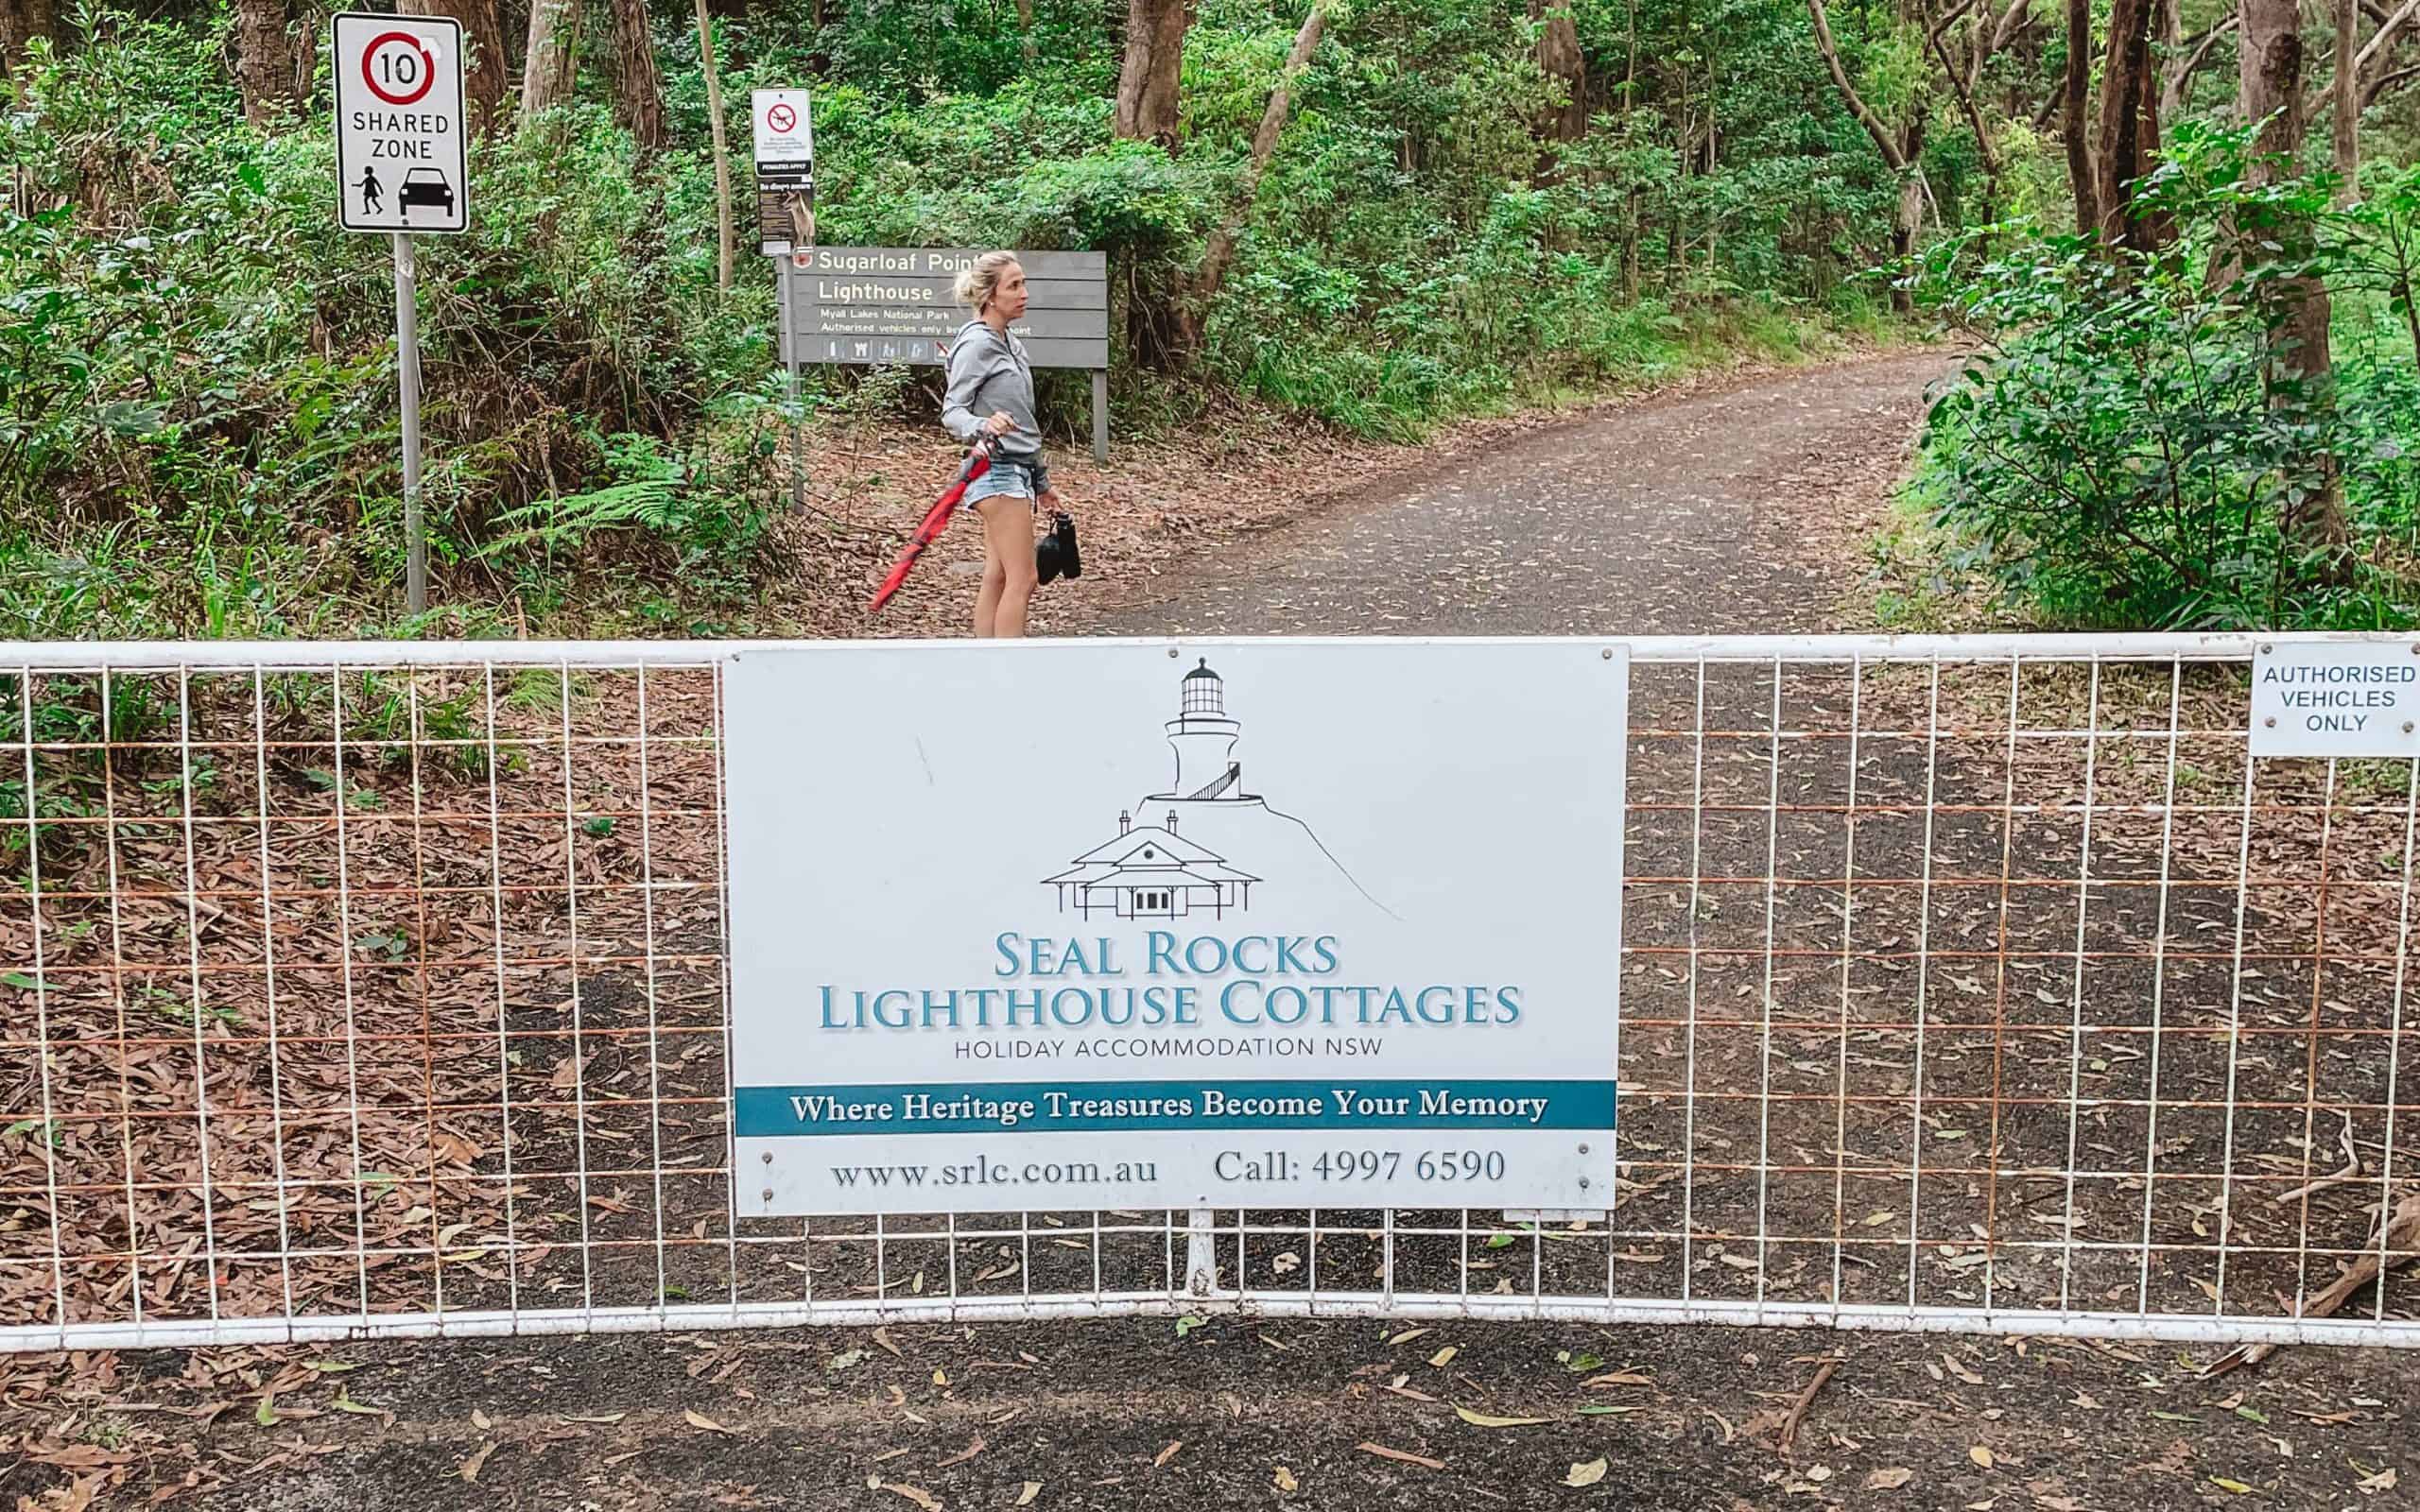 Gate at the start of the lighthouse trail